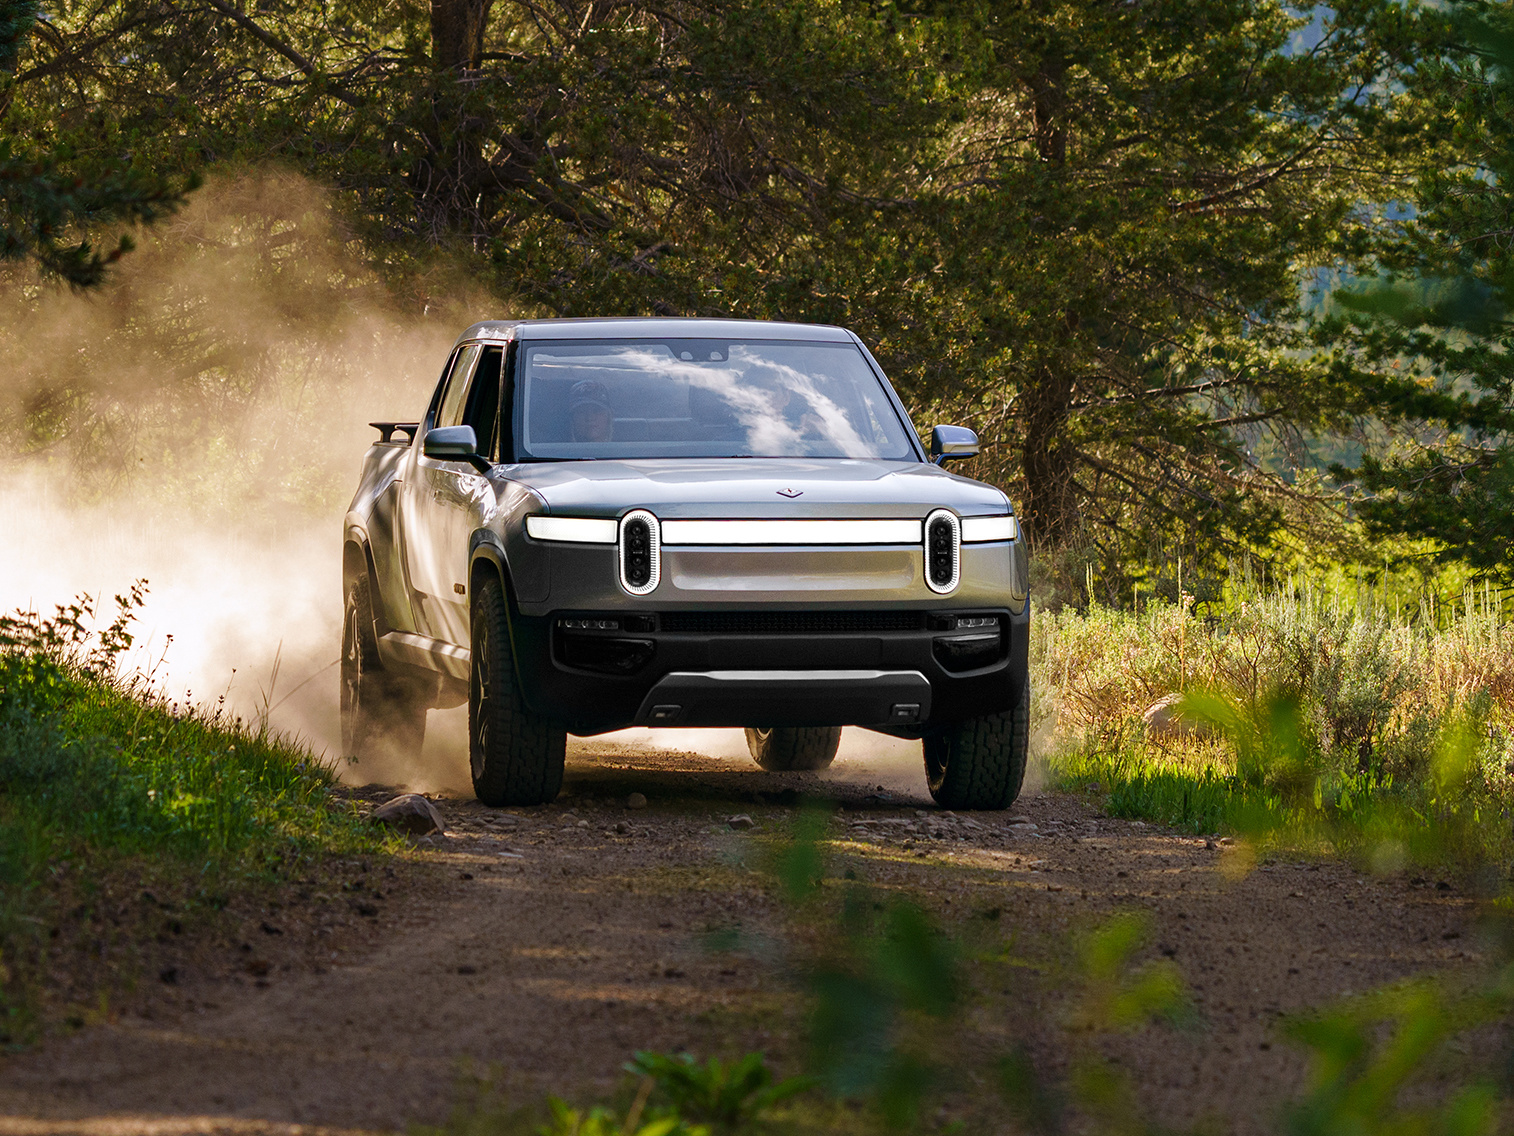 Rivian is poised to make an earnest go of it in the tough U.S. vehicle market.